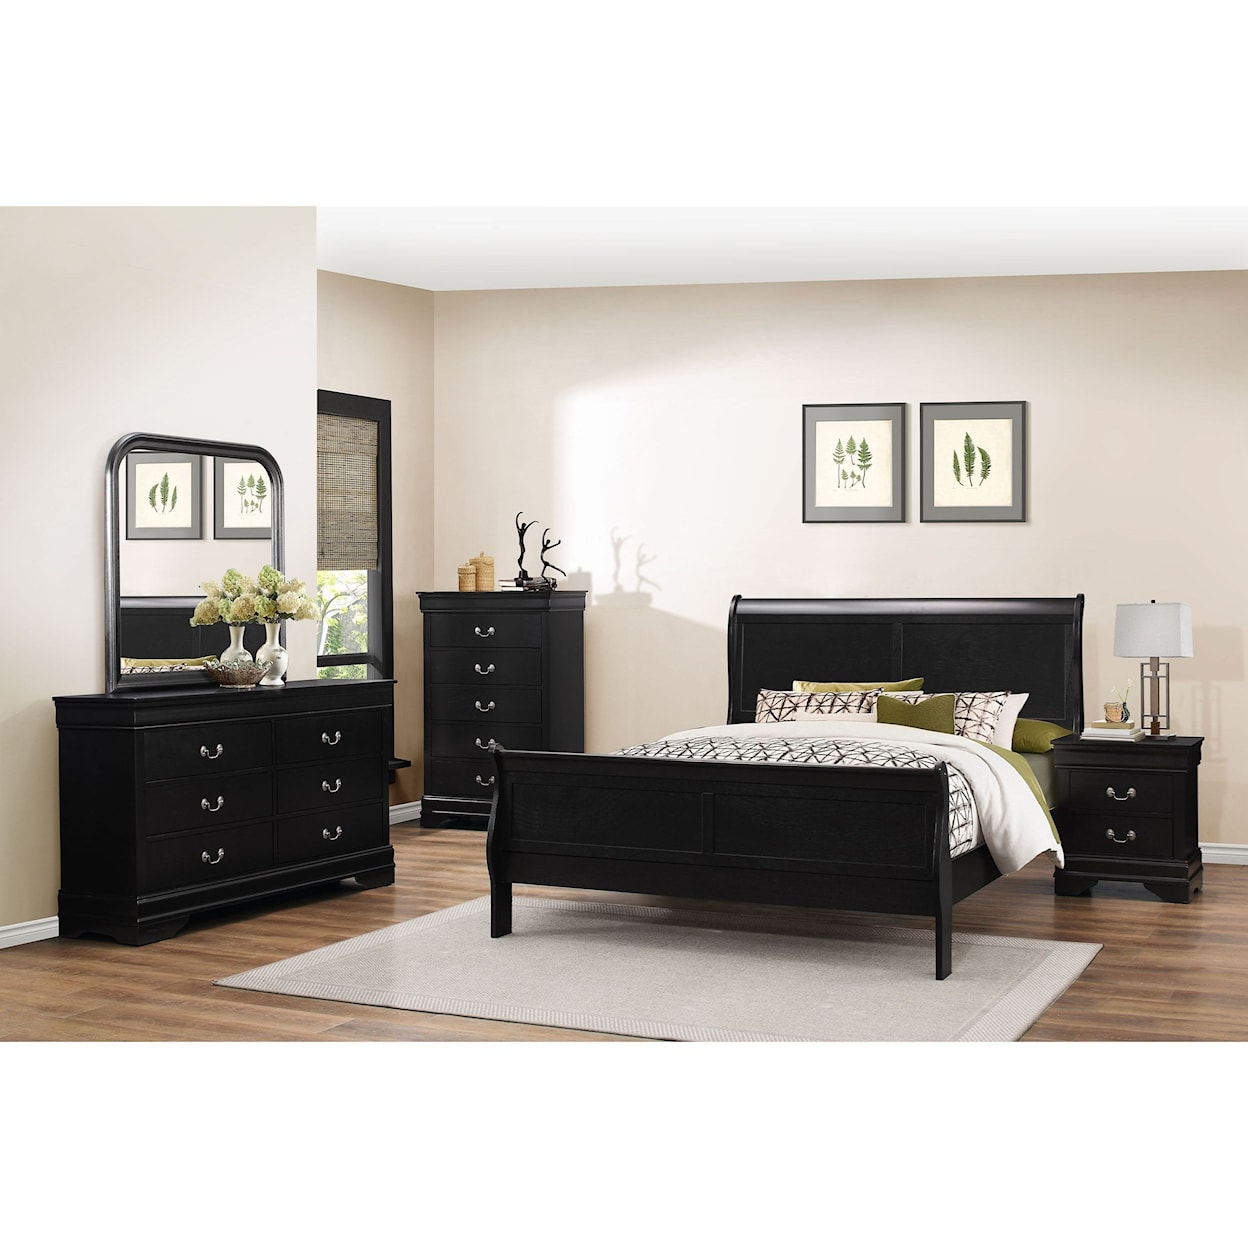 Lifestyle 4937 5 Piece Queen Bedroom Set with Chest